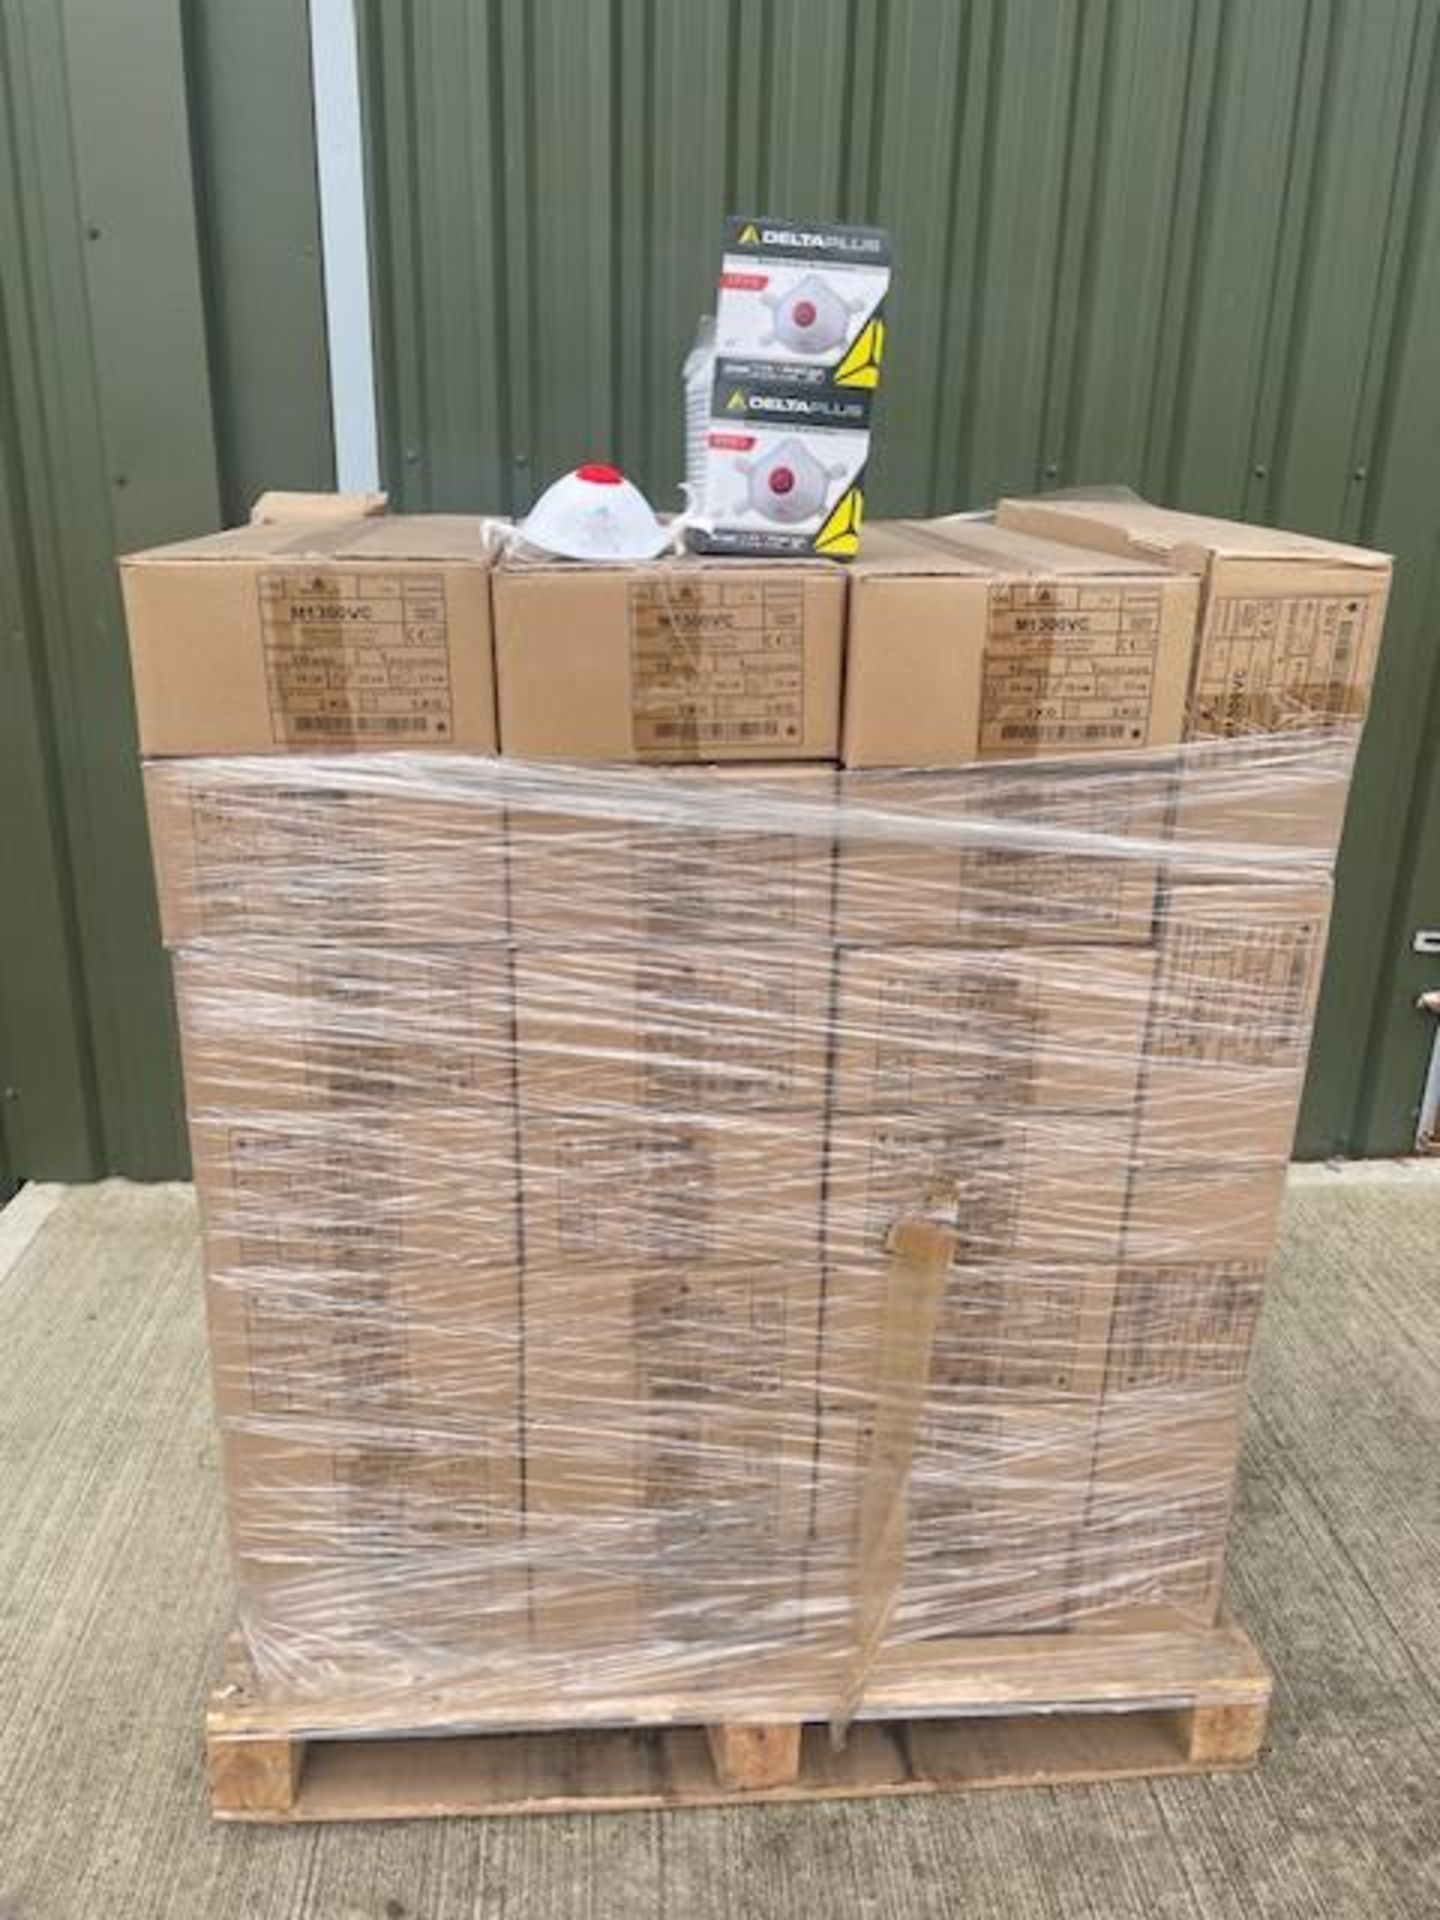 1 PALLET OF 1100 NEW UNUSED DELTA PLUS HIGH QUALITY DUST RESPIRATOR MASKS CE MARKED WITH VALVE - Image 2 of 6